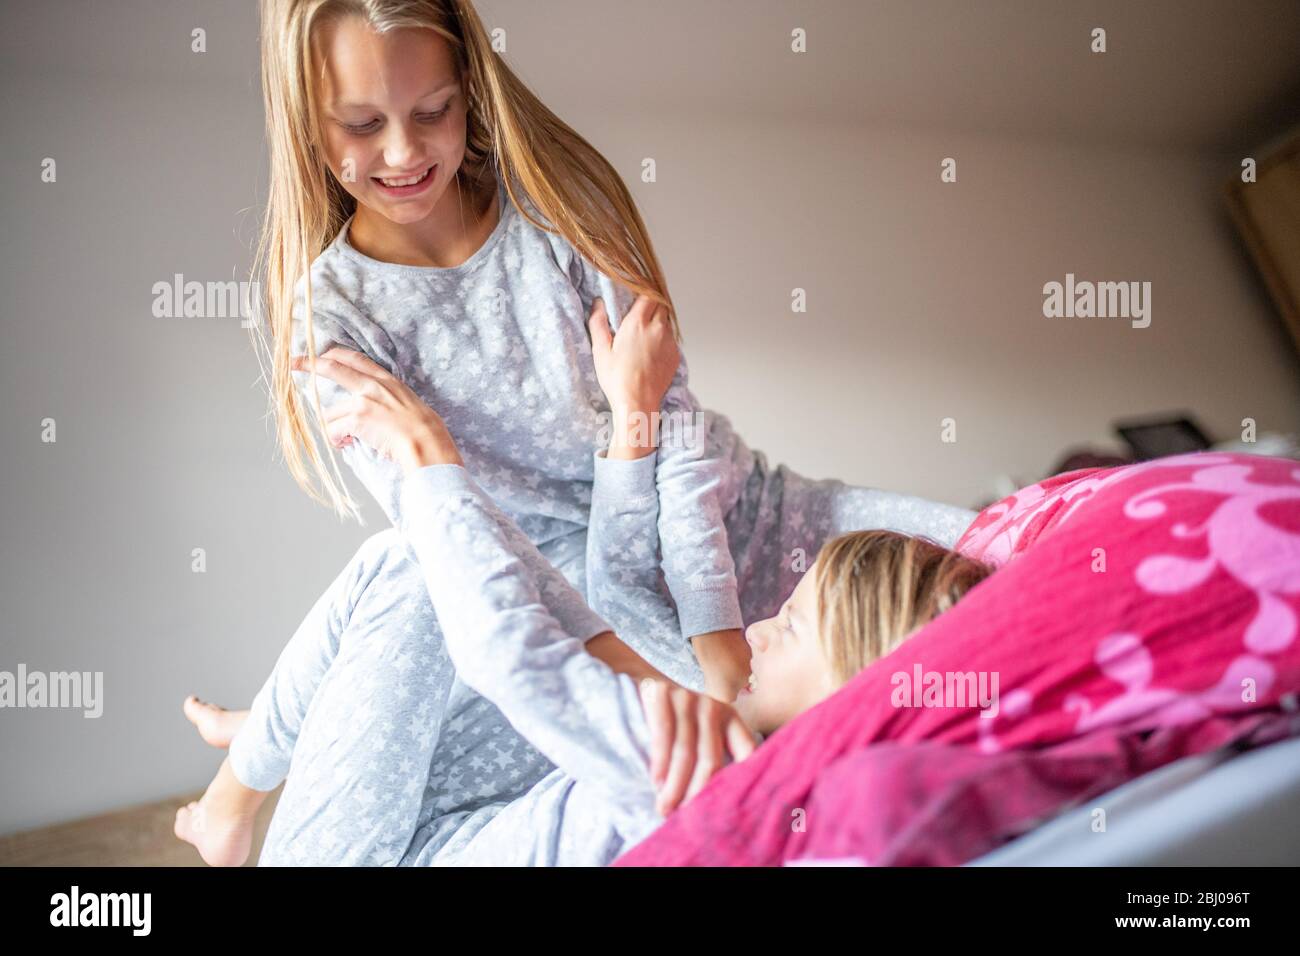 two girls are arguing and fighting with each other Stock Photo